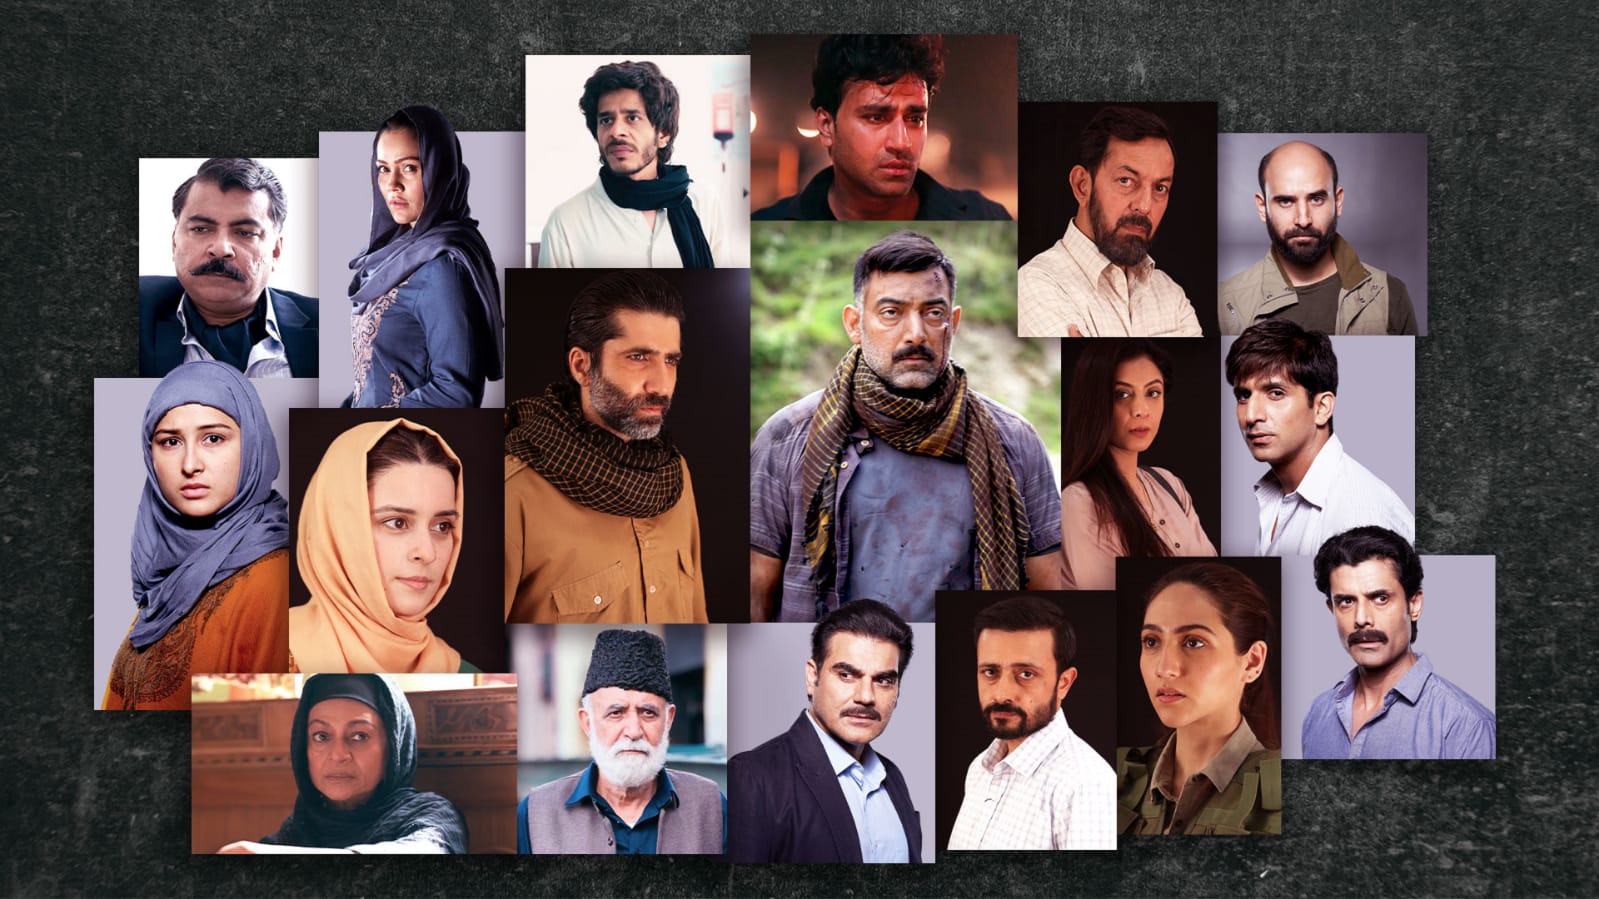 The Indian adaptation of the Israeli hit series ‘Fauda’, “Tanaav” is bei ng brought to you by SonyLIV in association with Applause Entertainment!